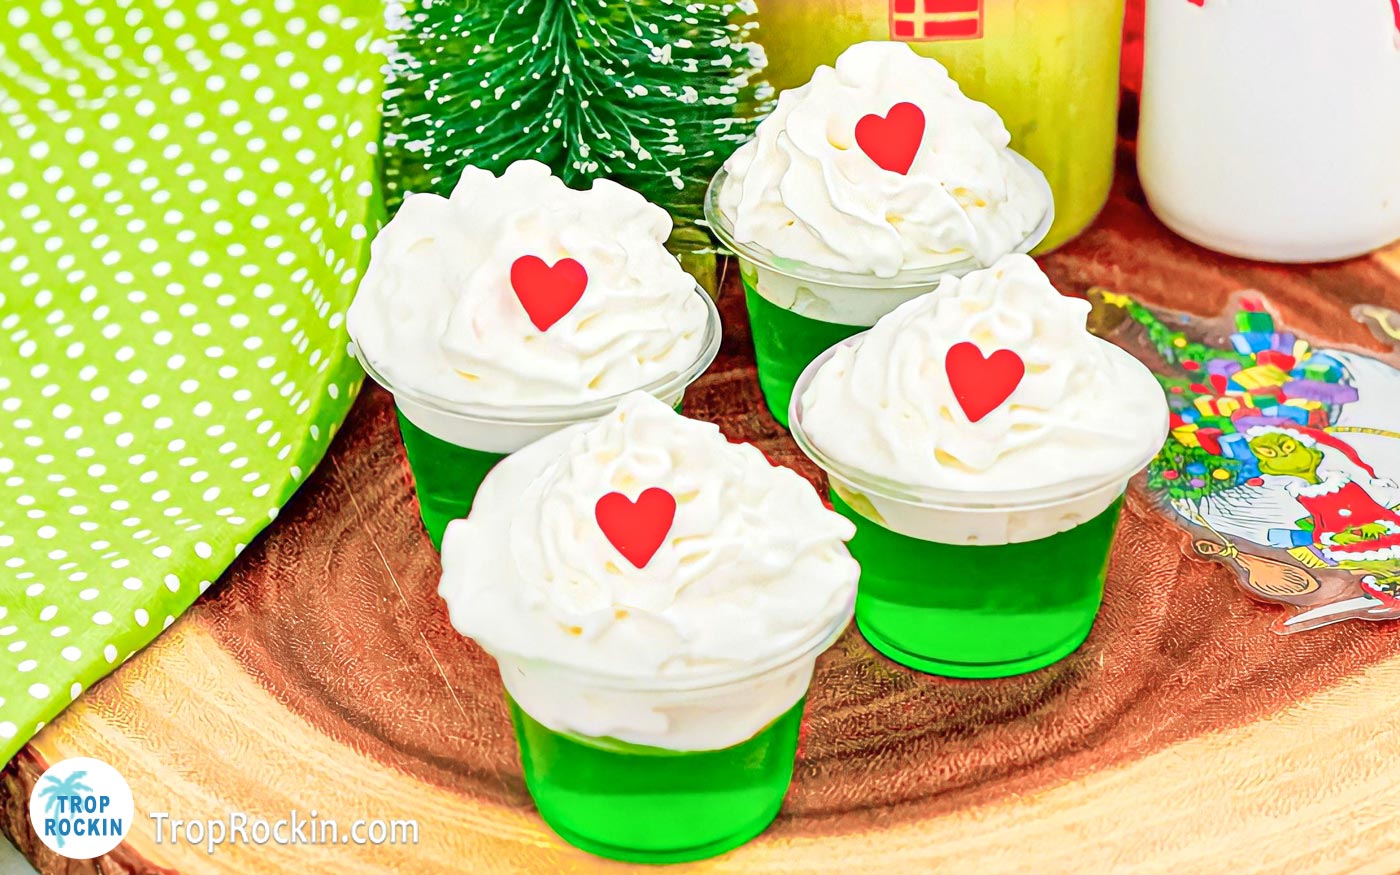 Four Grinch Jello Shots made with green jello and topped with whipped cream and a red heart sprinkle displayed on a wood cutting board.